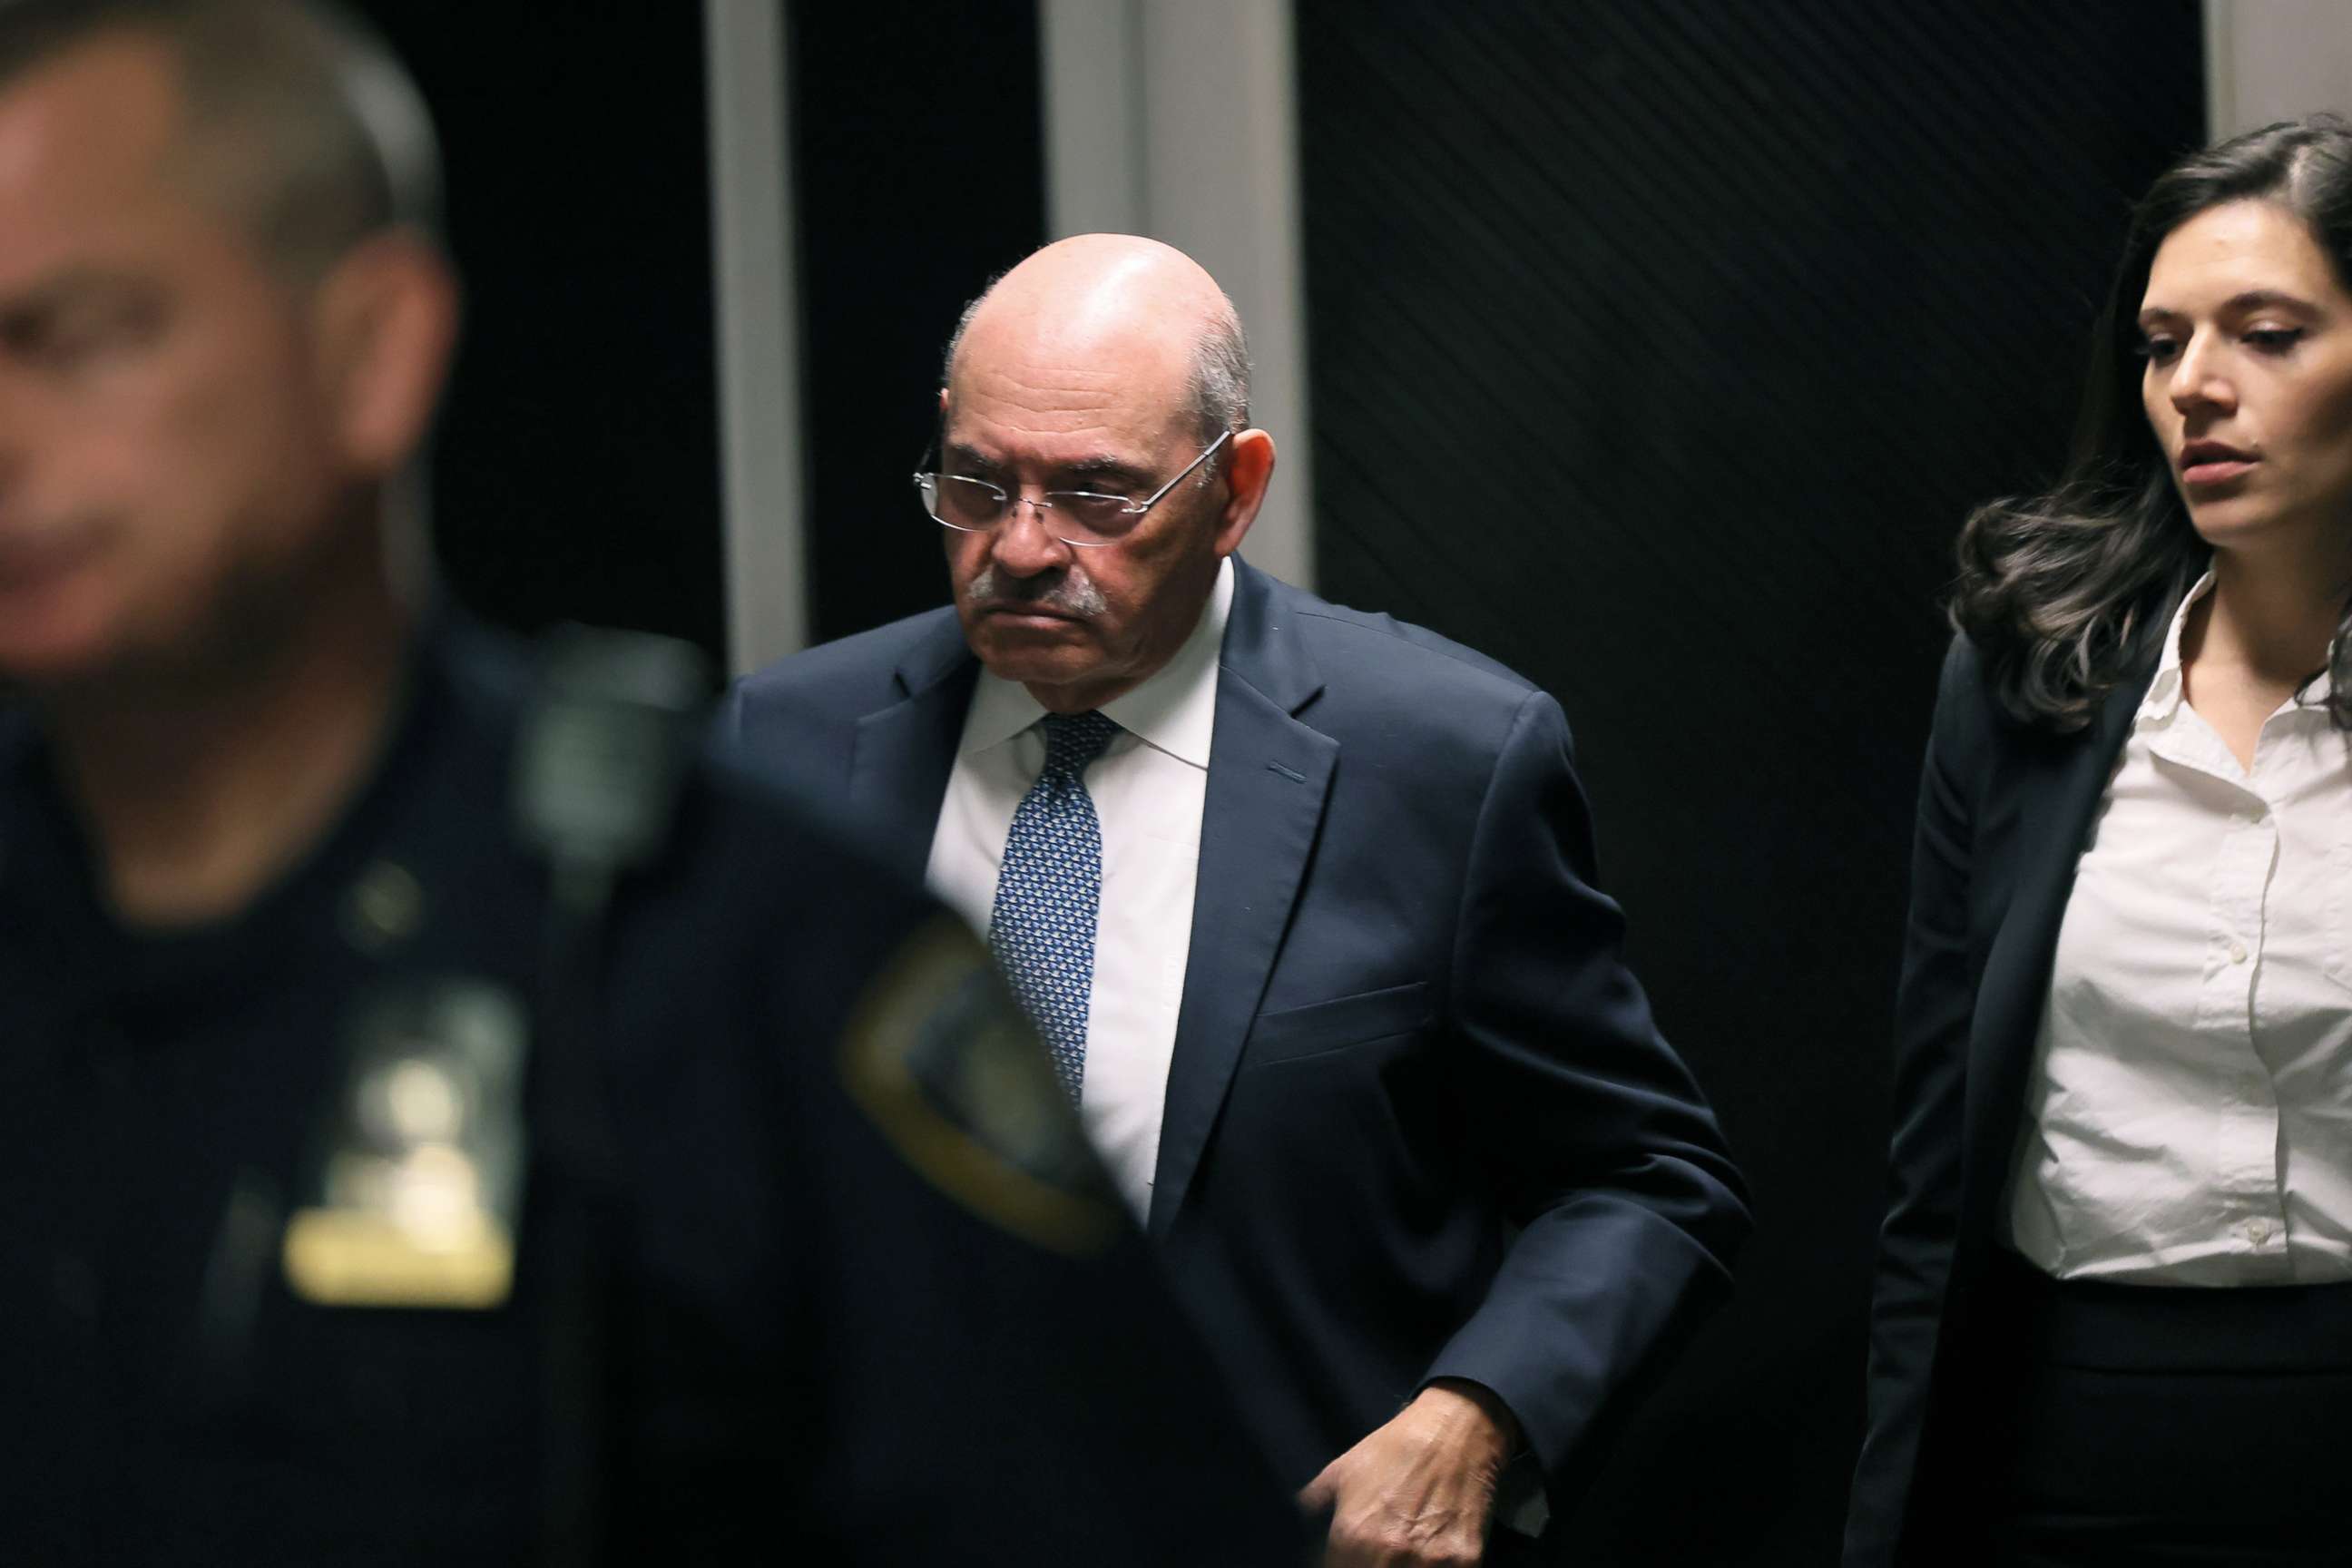 PHOTO: Former CFO Allen Weisselberg leaves the courtroom for a lunch recess during a trial at the New York Supreme Court, Nov. 17, 2022, in New York.